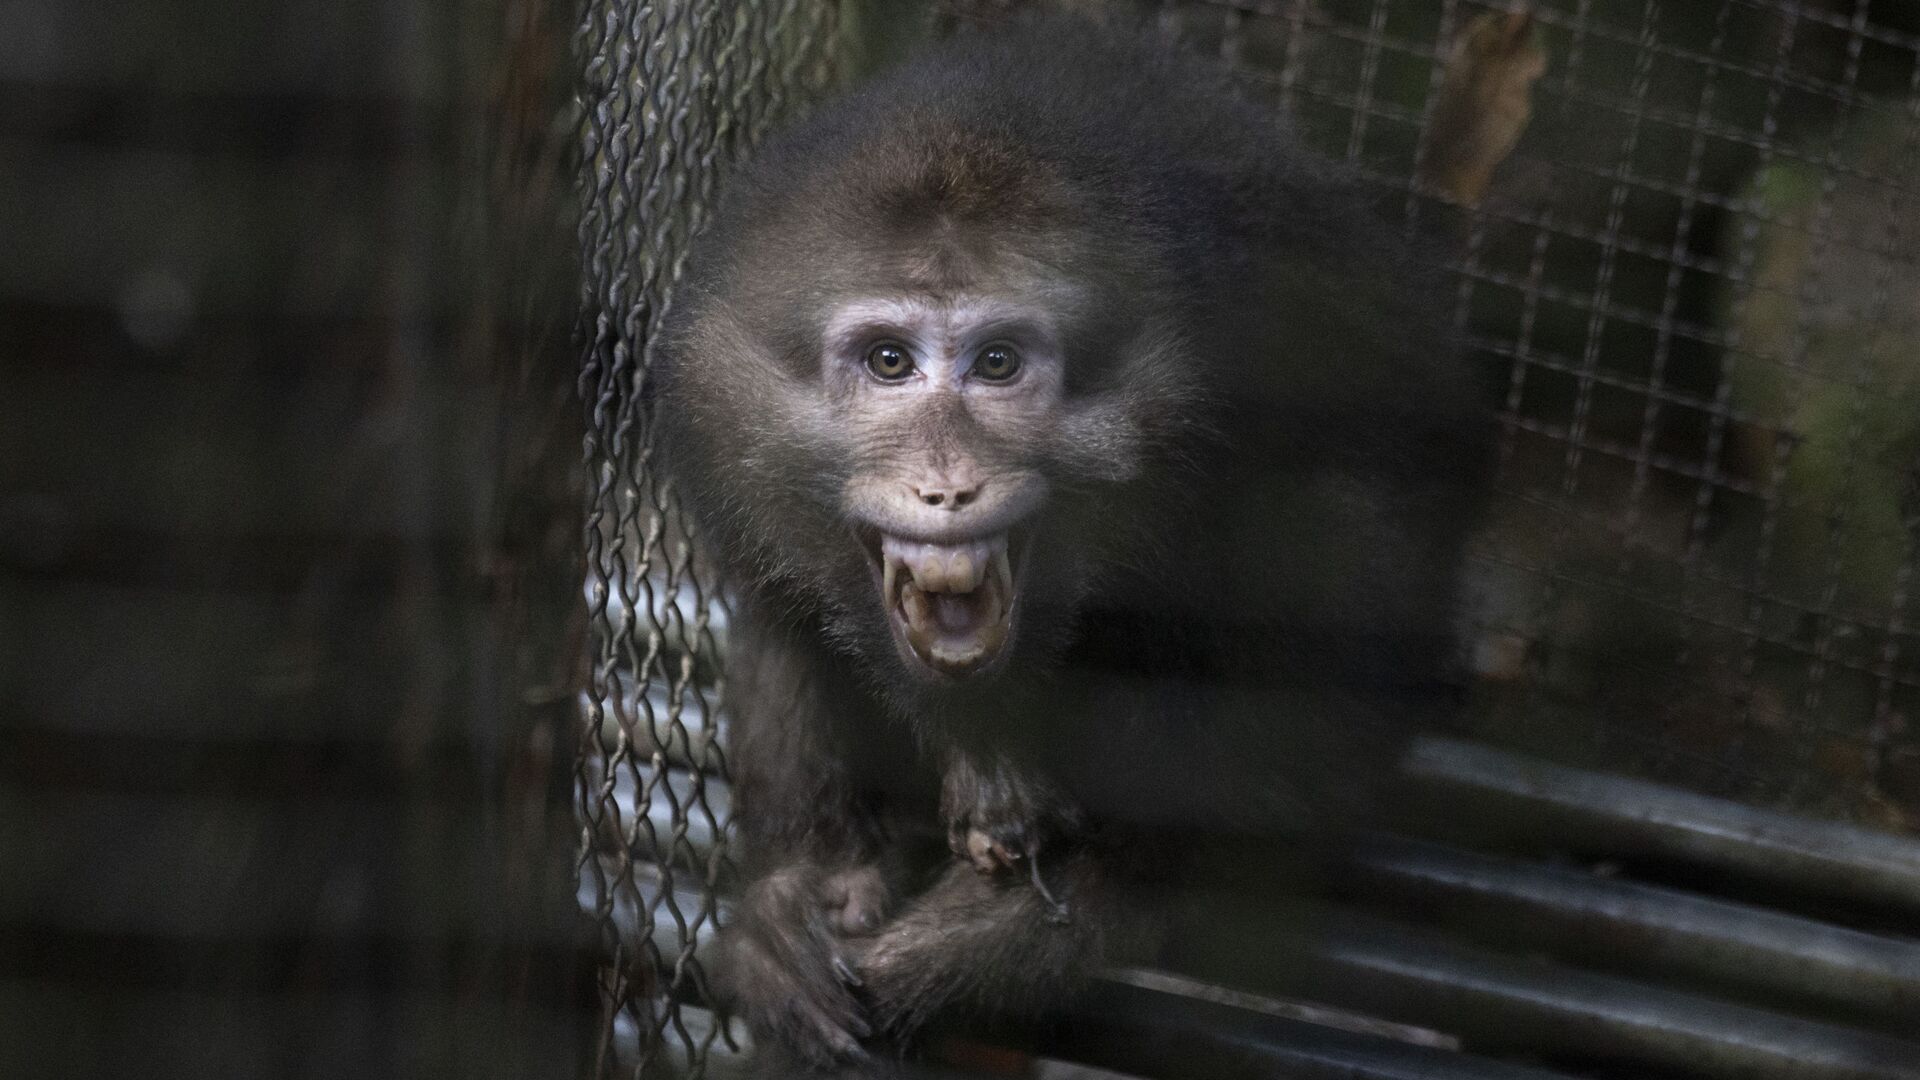 A monkey bares its teeth at visitors in an animal shelter that is part of tourist site in Wuyishan in eastern China's Fujian province on Friday, Aug. 16, 2019 - Sputnik International, 1920, 24.05.2022